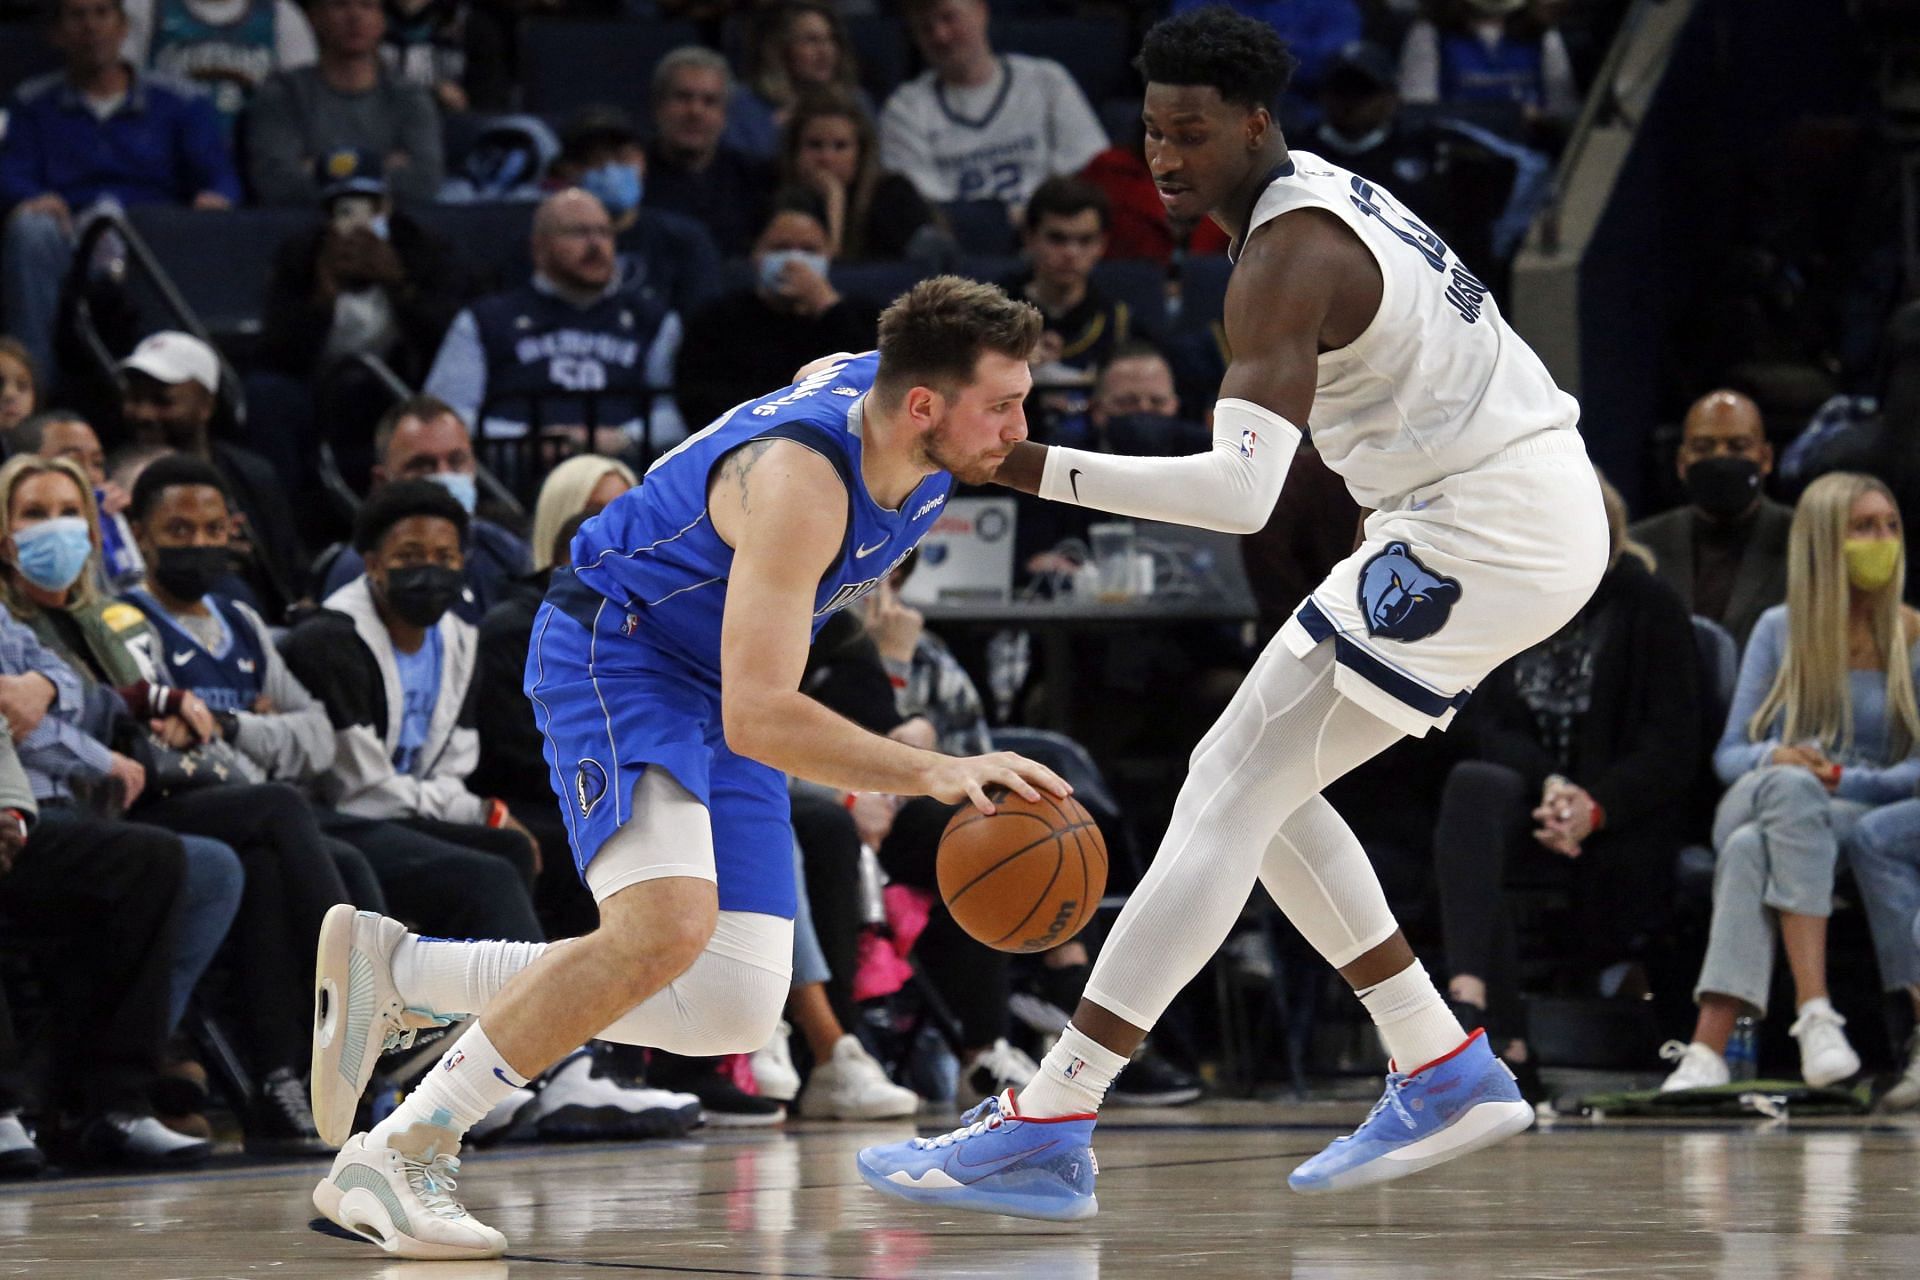 The NBA will highlight the game between the Dallas Mavericks and Memphis Grizzlies tonight. [photo: Reuters]